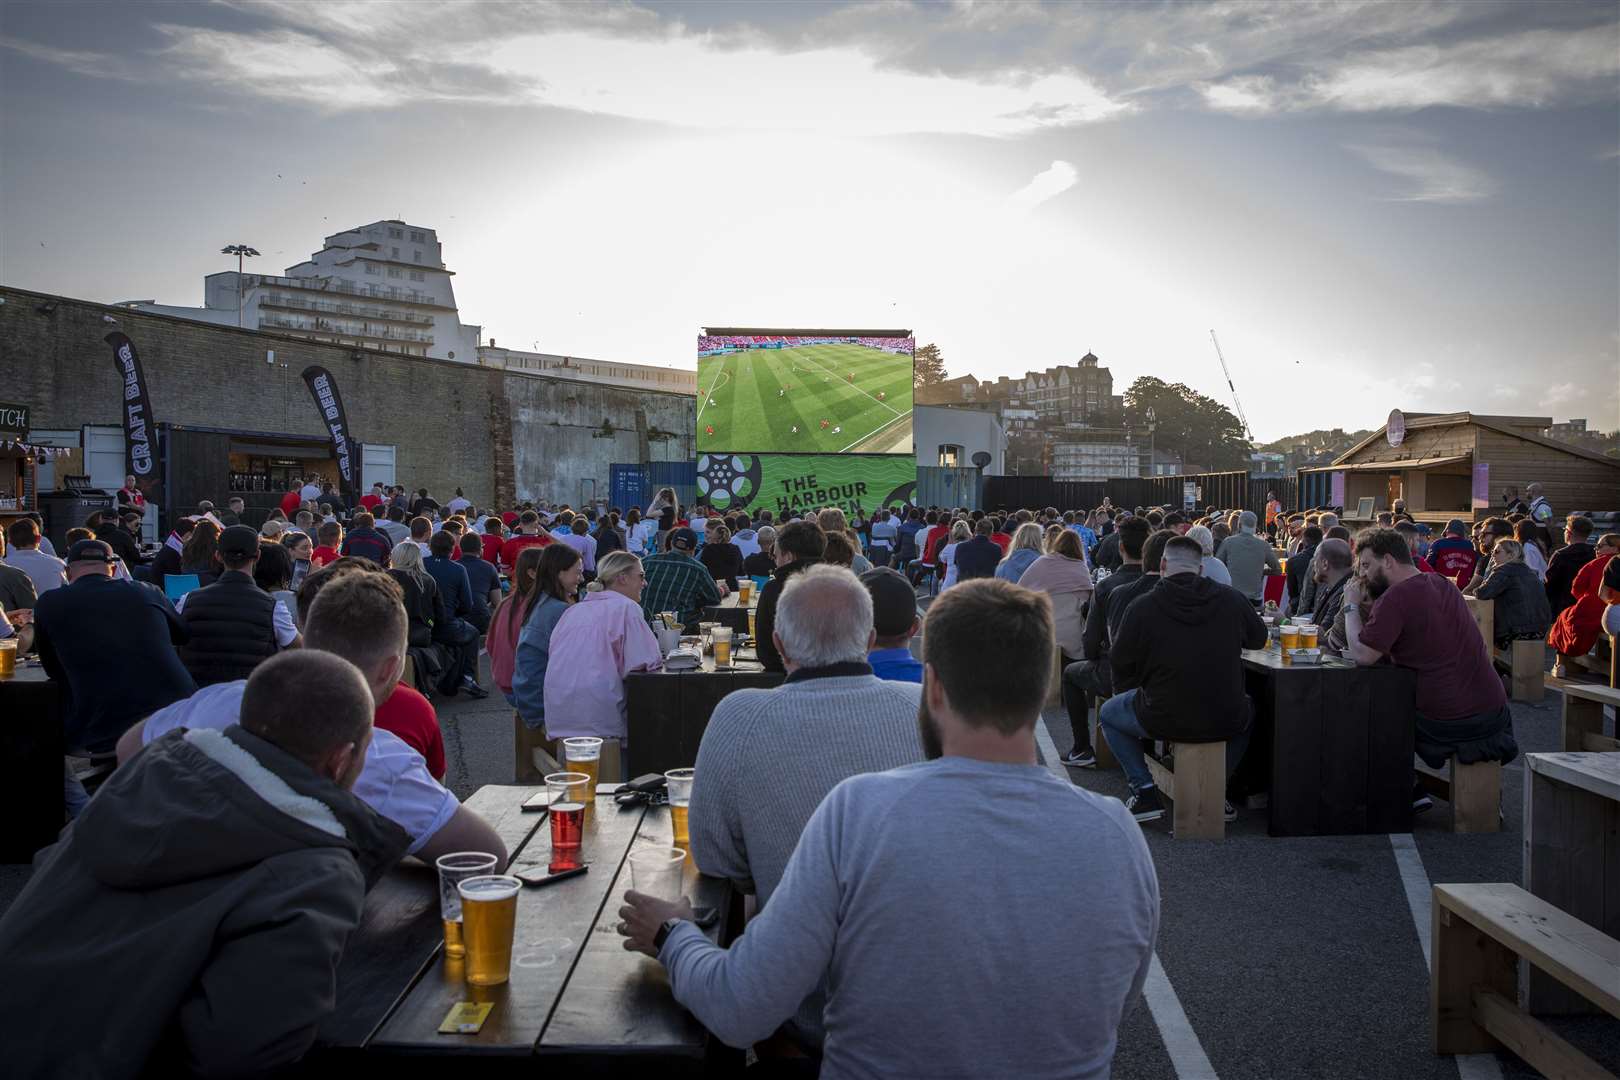 Football fans recently watched the Euros on the big screen. Photo: Andy Aitchison/Folkestone Harbour Arm